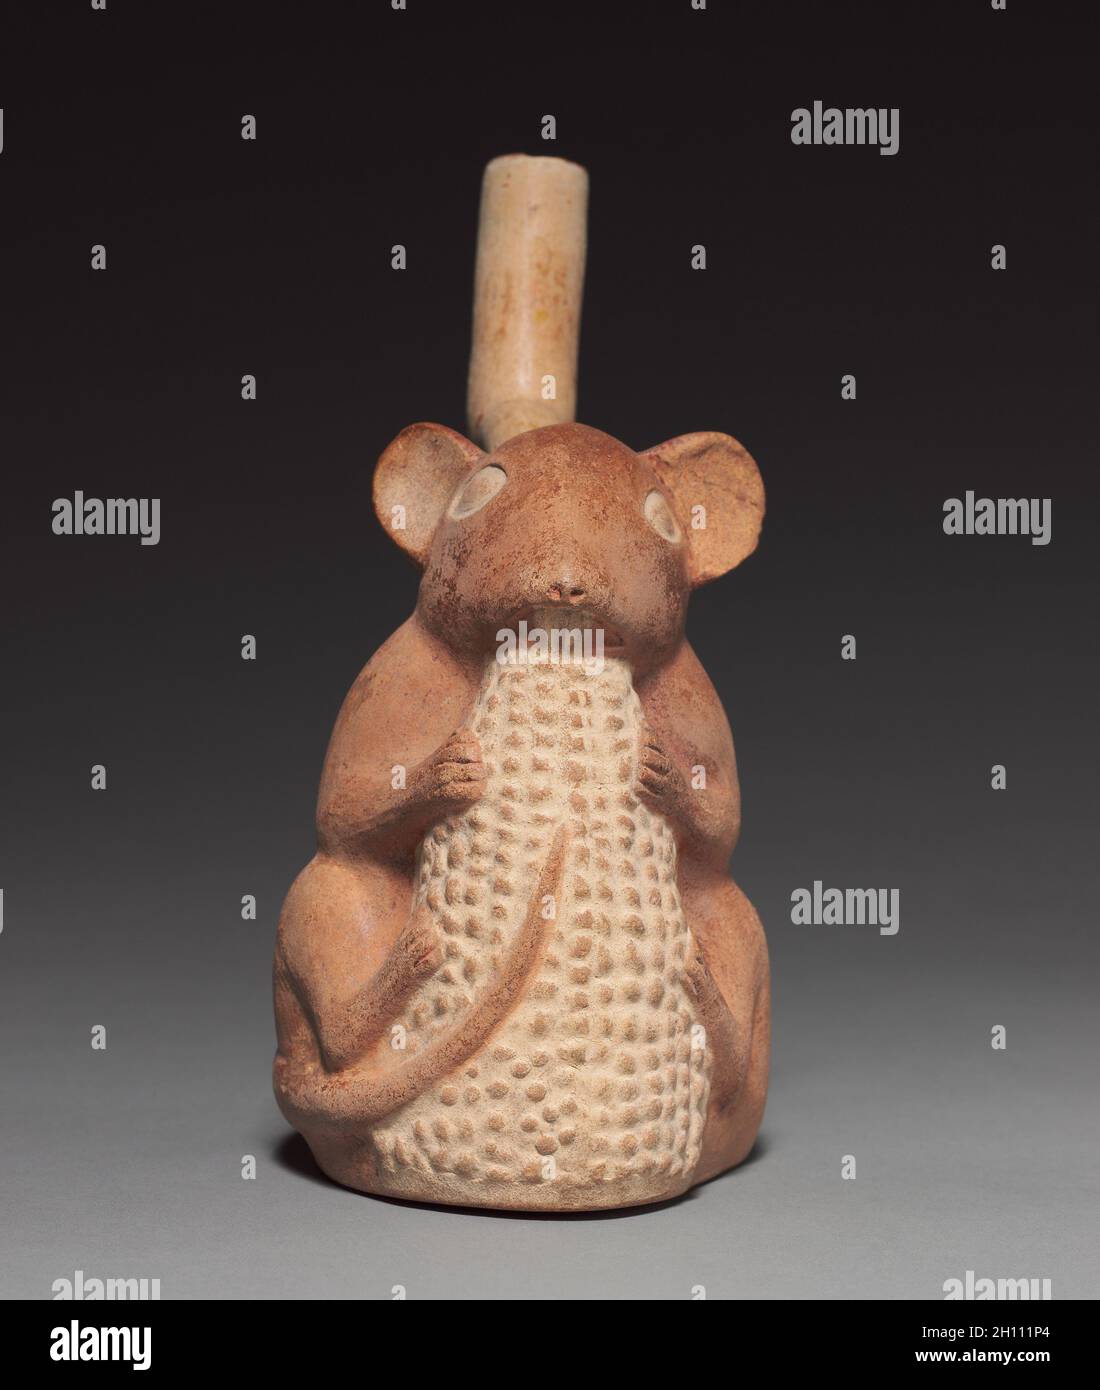 Rodent with Corn, 50-800. Peru. Pottery; overall: 23.6 x 10.9 x 18.7 cm (9 5/16 x 4 5/16 x 7 3/8 in.). Stock Photo